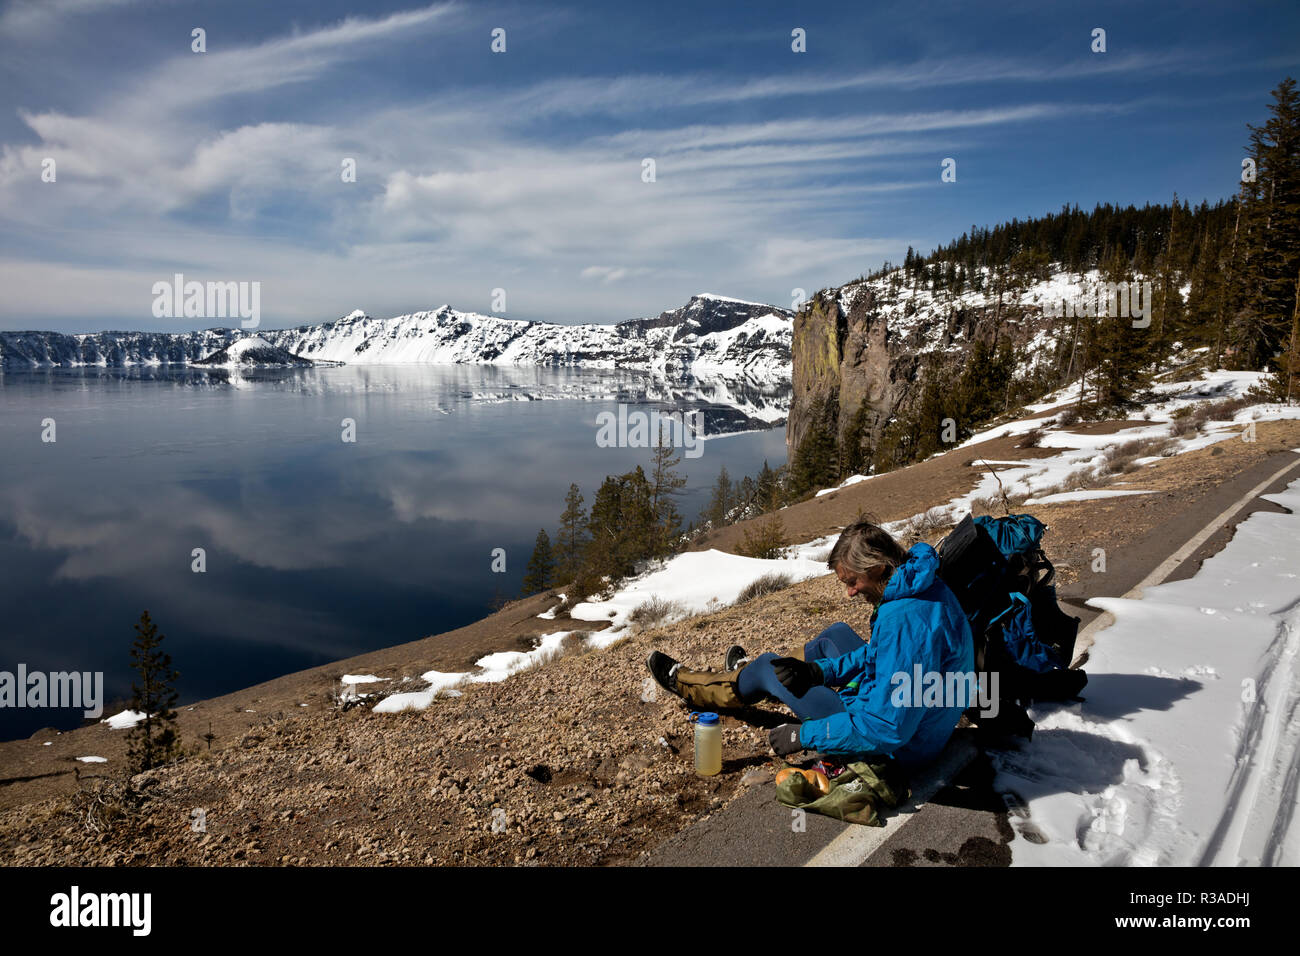 OR02452-00...OREGON - Lunch break overlooking Grotto Cove on a cross-country ski trip around Crater Lake in Crater Lake National Park. Stock Photo